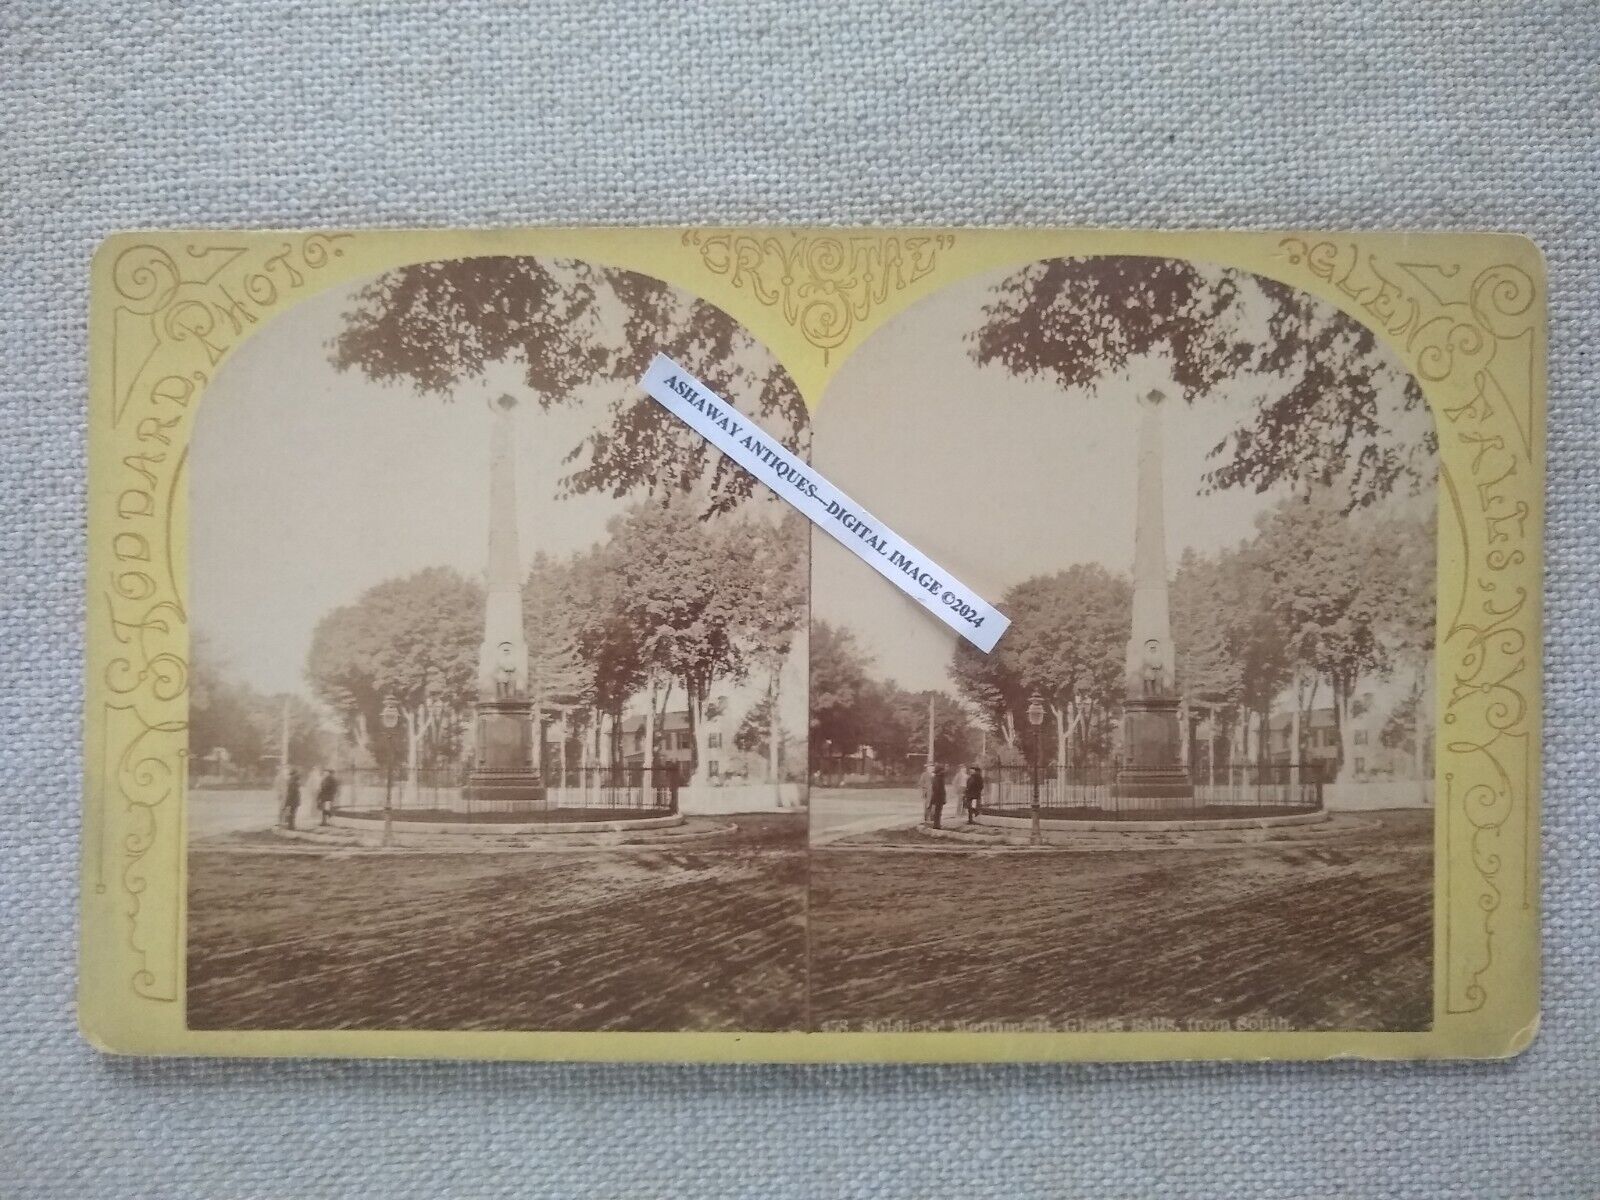 1870s SV of MEN by CIVIL WAR Monument in Street at GLENS FALLS NY by STODDARD